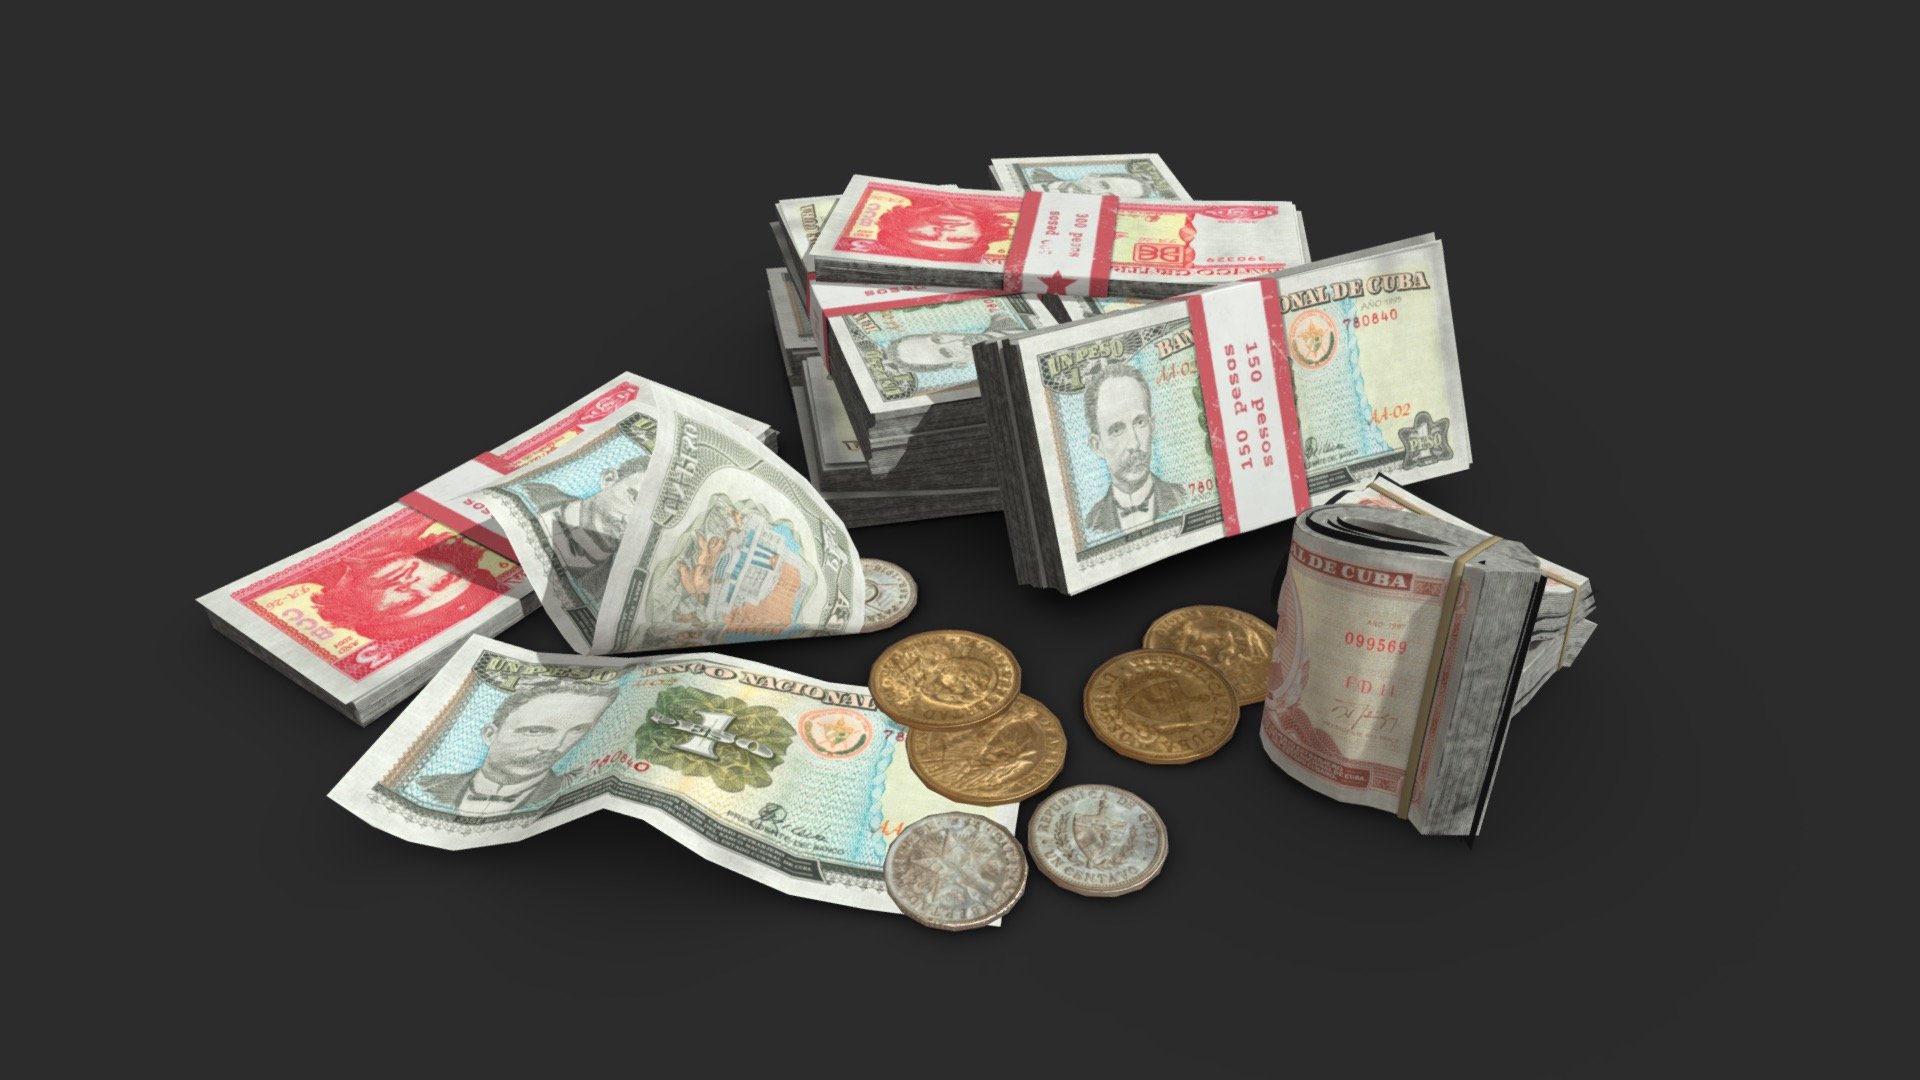 This old Cuban Pesos money loots including banknotes and coins includes 22 objects :




10 individuals banknotes (in 2 values)

4 different coins

3 banknote stacks

The assets can be used in any game (post-apocaliptic, first or third person, GTA like, survival… ). All objects share a unique material for the best optimization for games.

Those AAA game assets pack of money loots will embellish your scene and add more details which can help the gameplay, the game design or the level design.

All textures are PBR ready and available in 4K.

Low-poly model &amp; Blender native 3.1

SPECIFICATIONS




Objects : 22

Polygons : 4541

GAME SPECS




LODs : Yes (inside FBX for Unity &amp; Unreal)

Numbers of LODs : 2

Collider : No

EXPORTED FORMATS




FBX

Collada

OBJ

TEXTURES




Materials in scene : 1

Textures sizes : 4K

Textures types : Base Color, Metallic, Roughness, Normal (DirectX &amp; OpenGL), Heigh &amp; AO (also Unity &amp; Unreal ARM workflow maps)

Textures format : PNG
 - Money Loot - Cuban Pesos - Buy Royalty Free 3D model by KangaroOz 3D (@KangaroOz-3D) 3d model